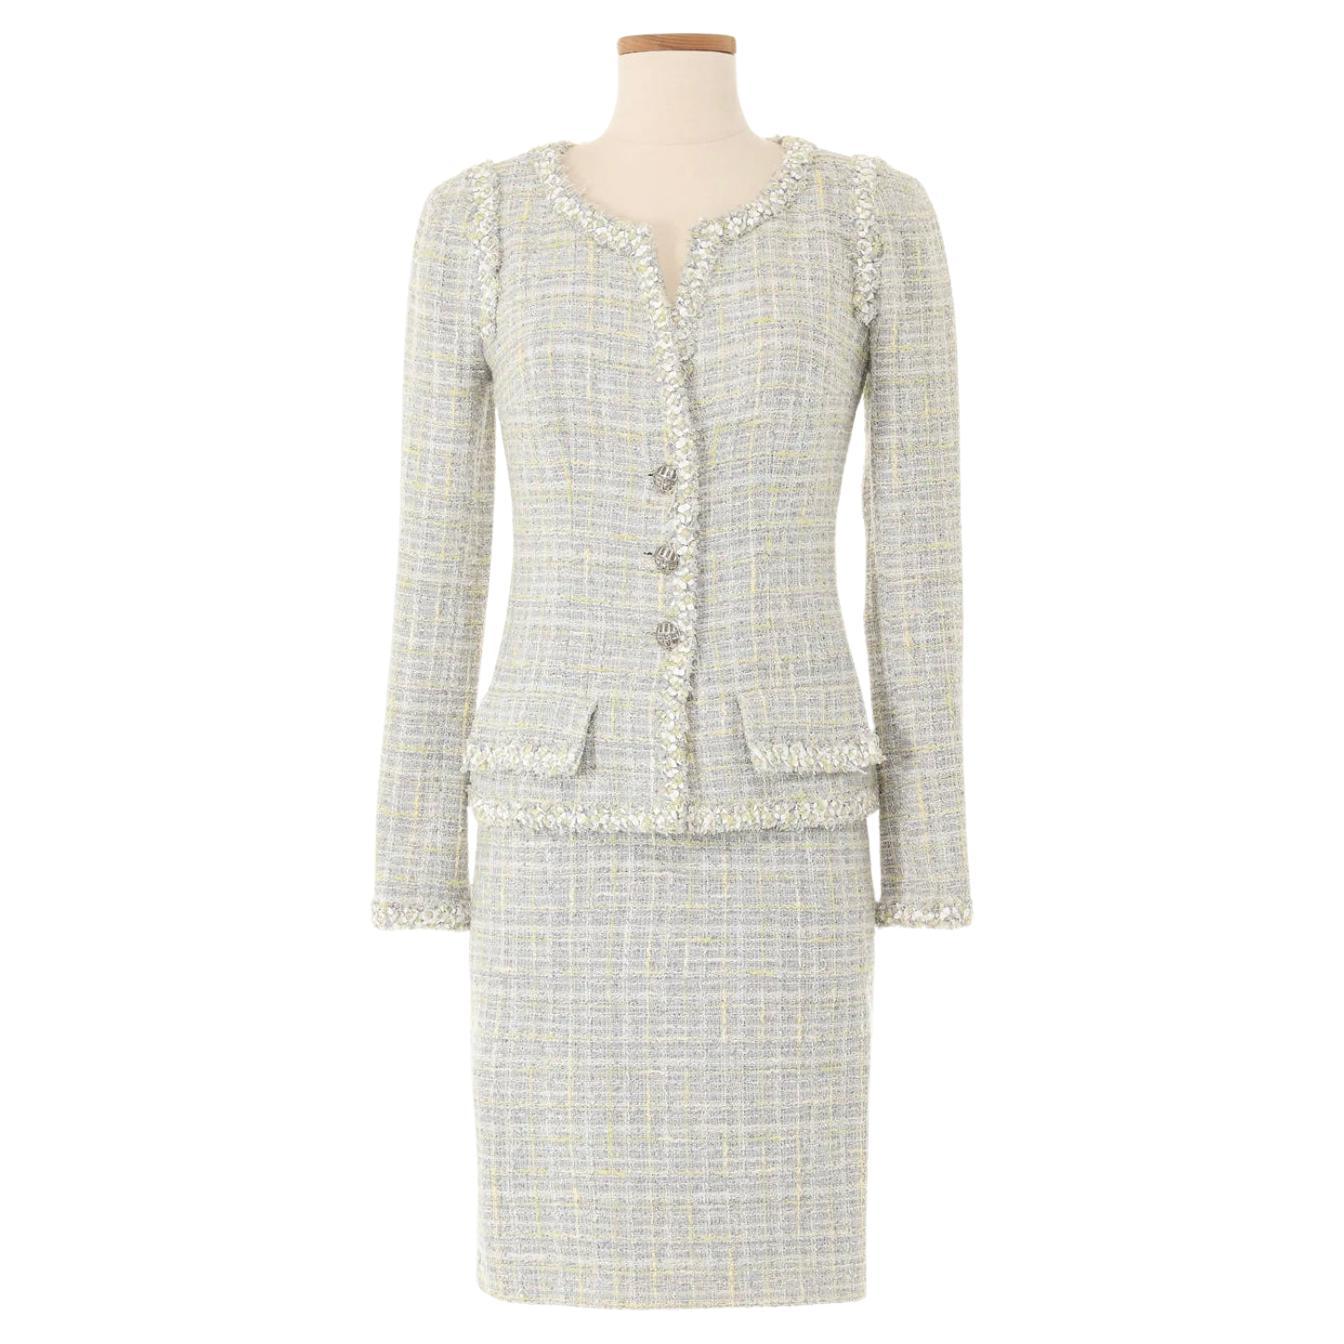 Chanel Spring 2009 Grey Tweed Skirt Suit For Sale